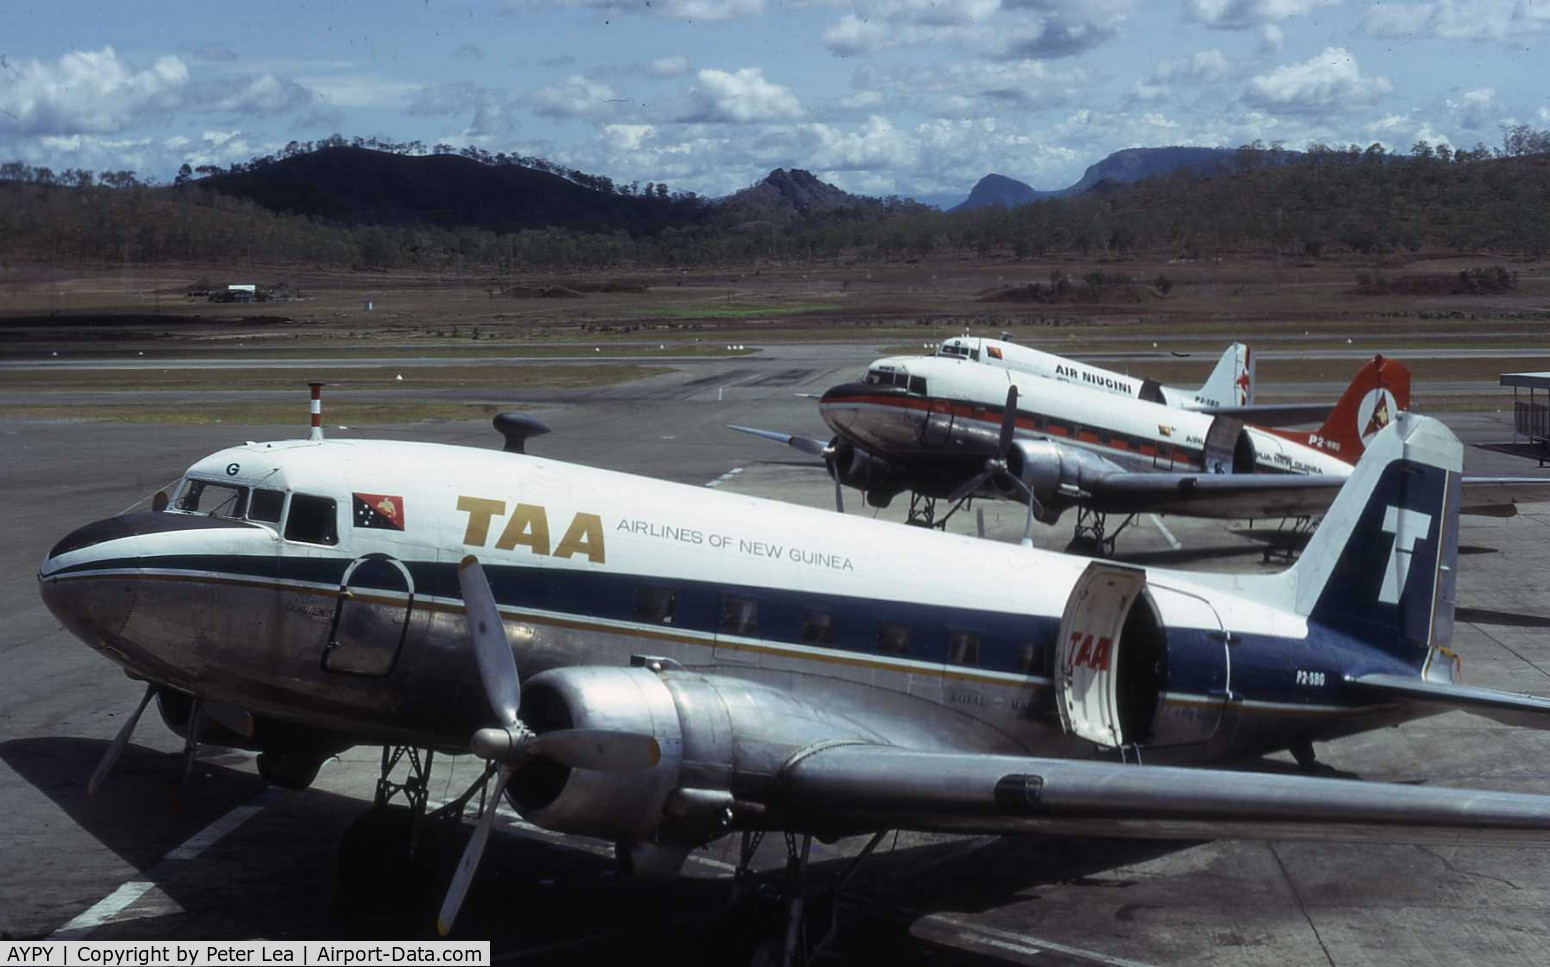 Port Moresby/Jackson International Airport, Port Moresby Papua New Guinea (AYPY) - A trio of Douglas DC-3's at Port Moresby Airport, each in a different color scheme. This was the transition period for the newly formed Air Nuigini. Photo taken December 1974